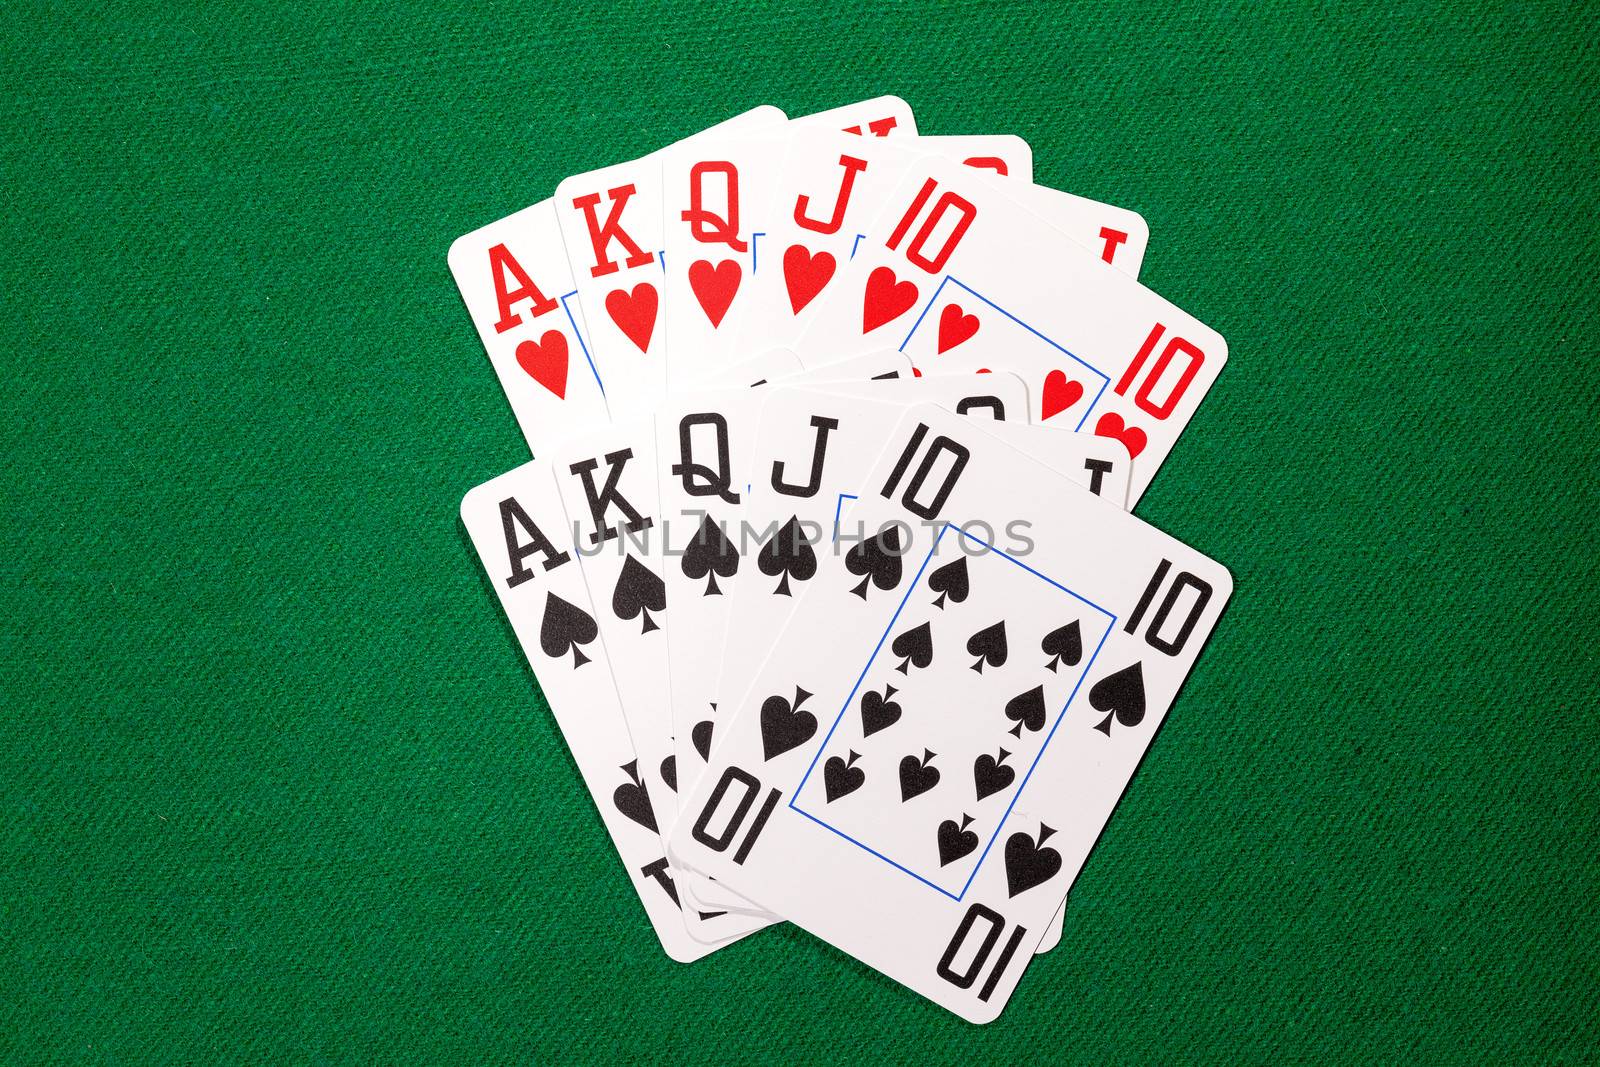 Poker cards with royal flush combination by Discovod